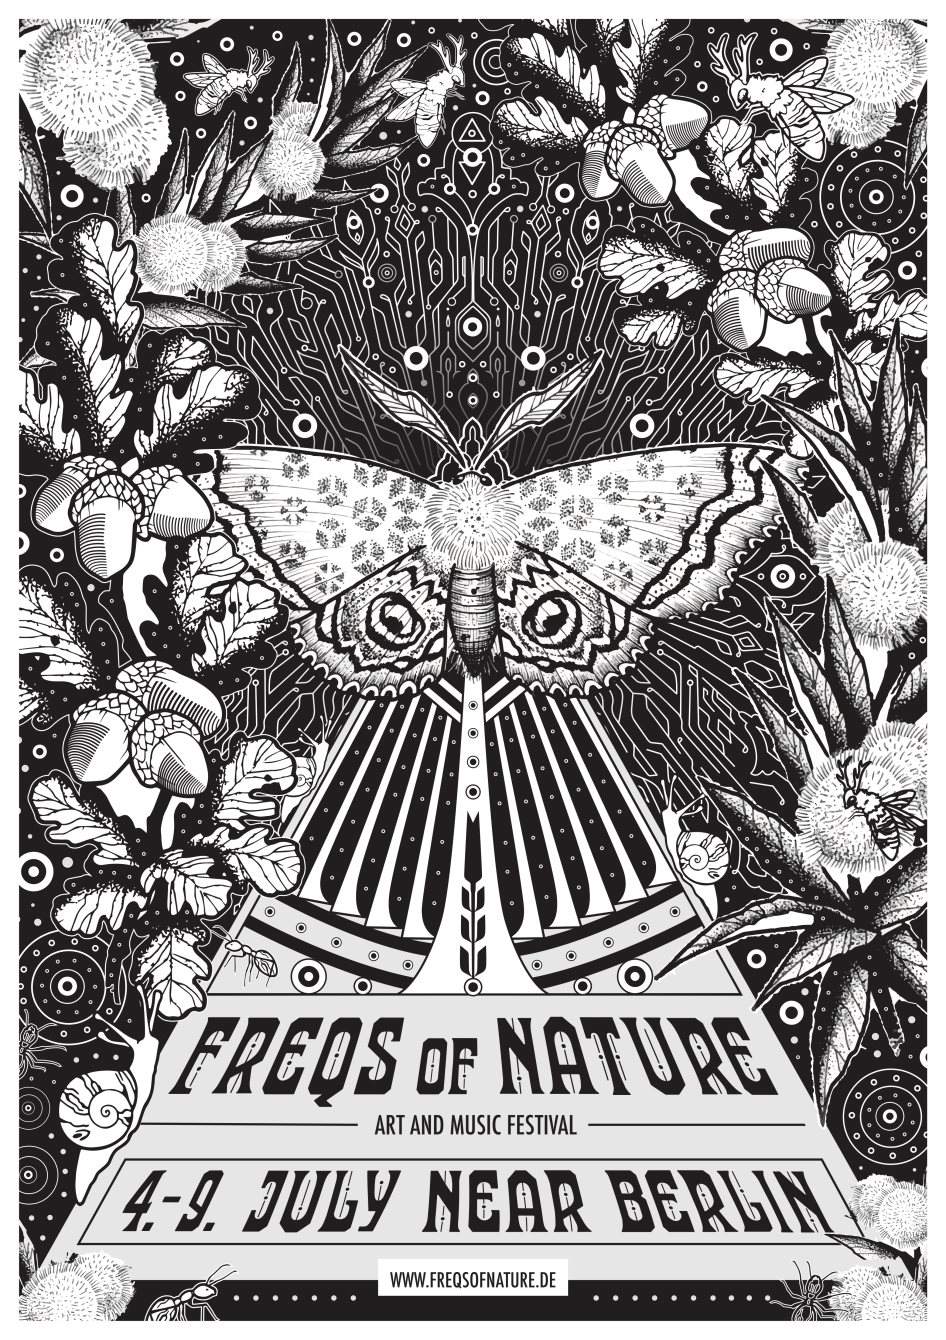 Freqs Of Nature: Peculiar Art, Music and Engineering Festival - Página trasera